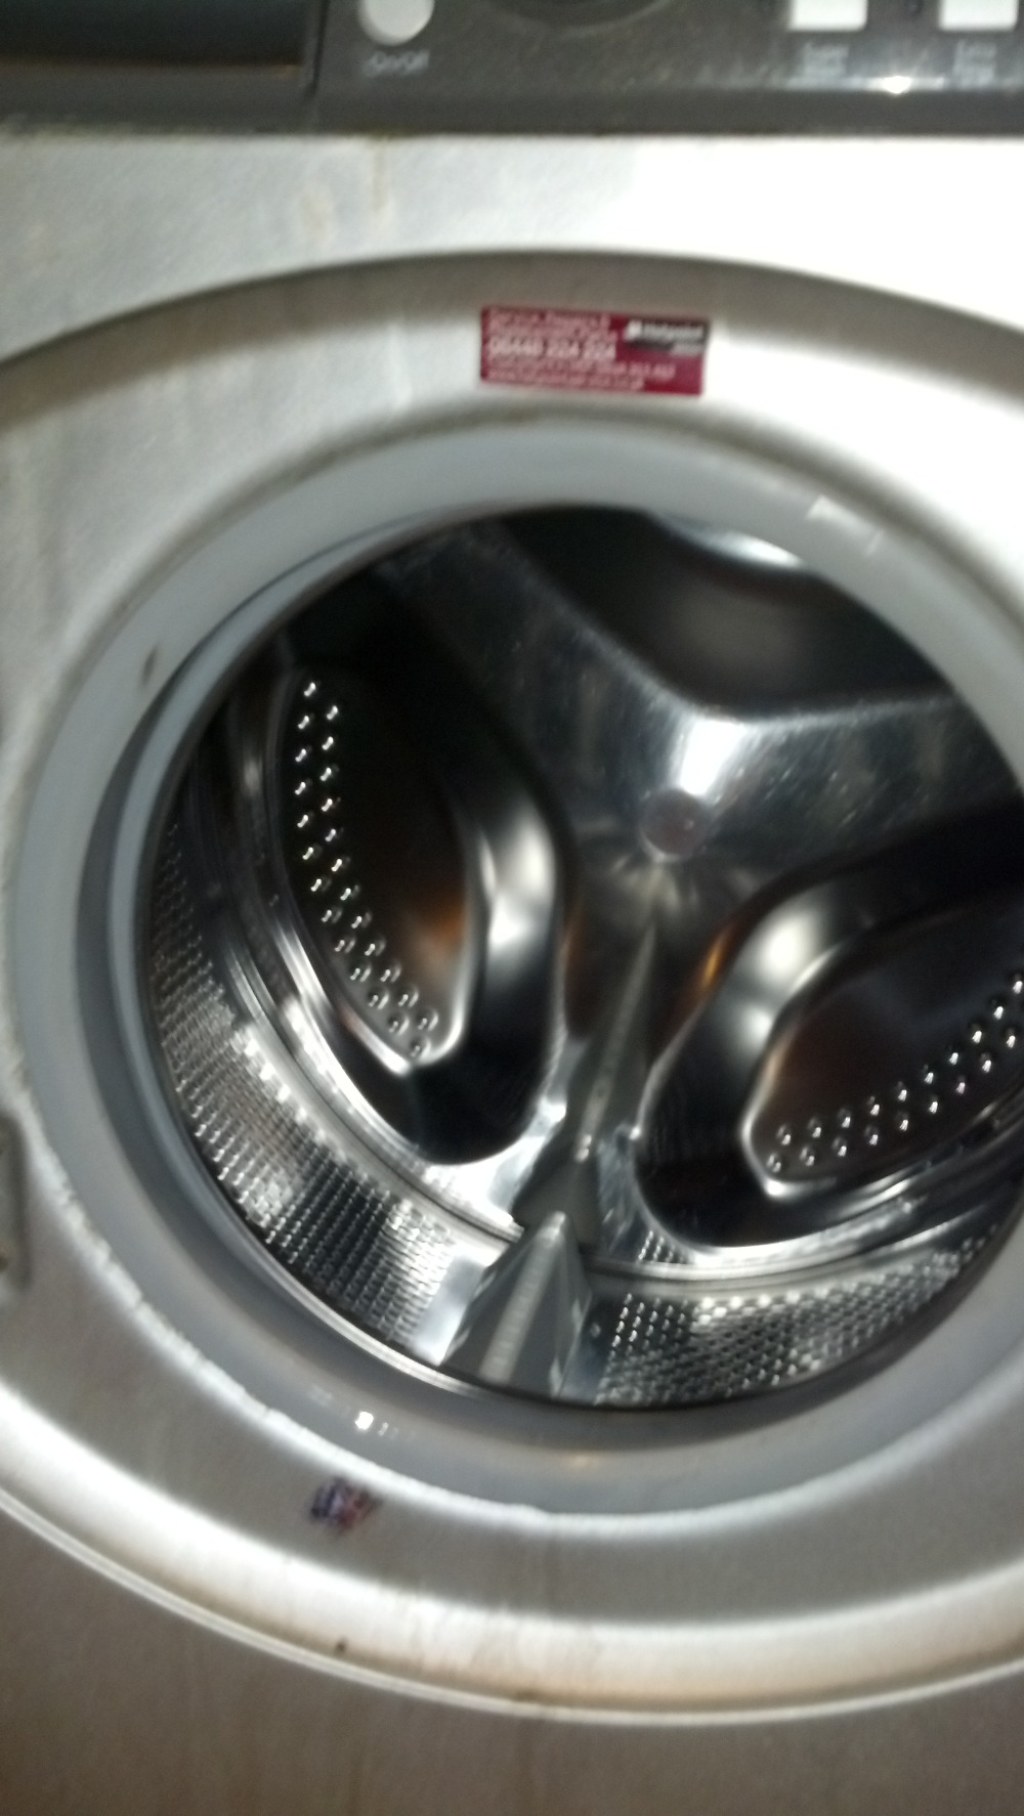 samsung washer drum fell down - Has the Drum sunk?